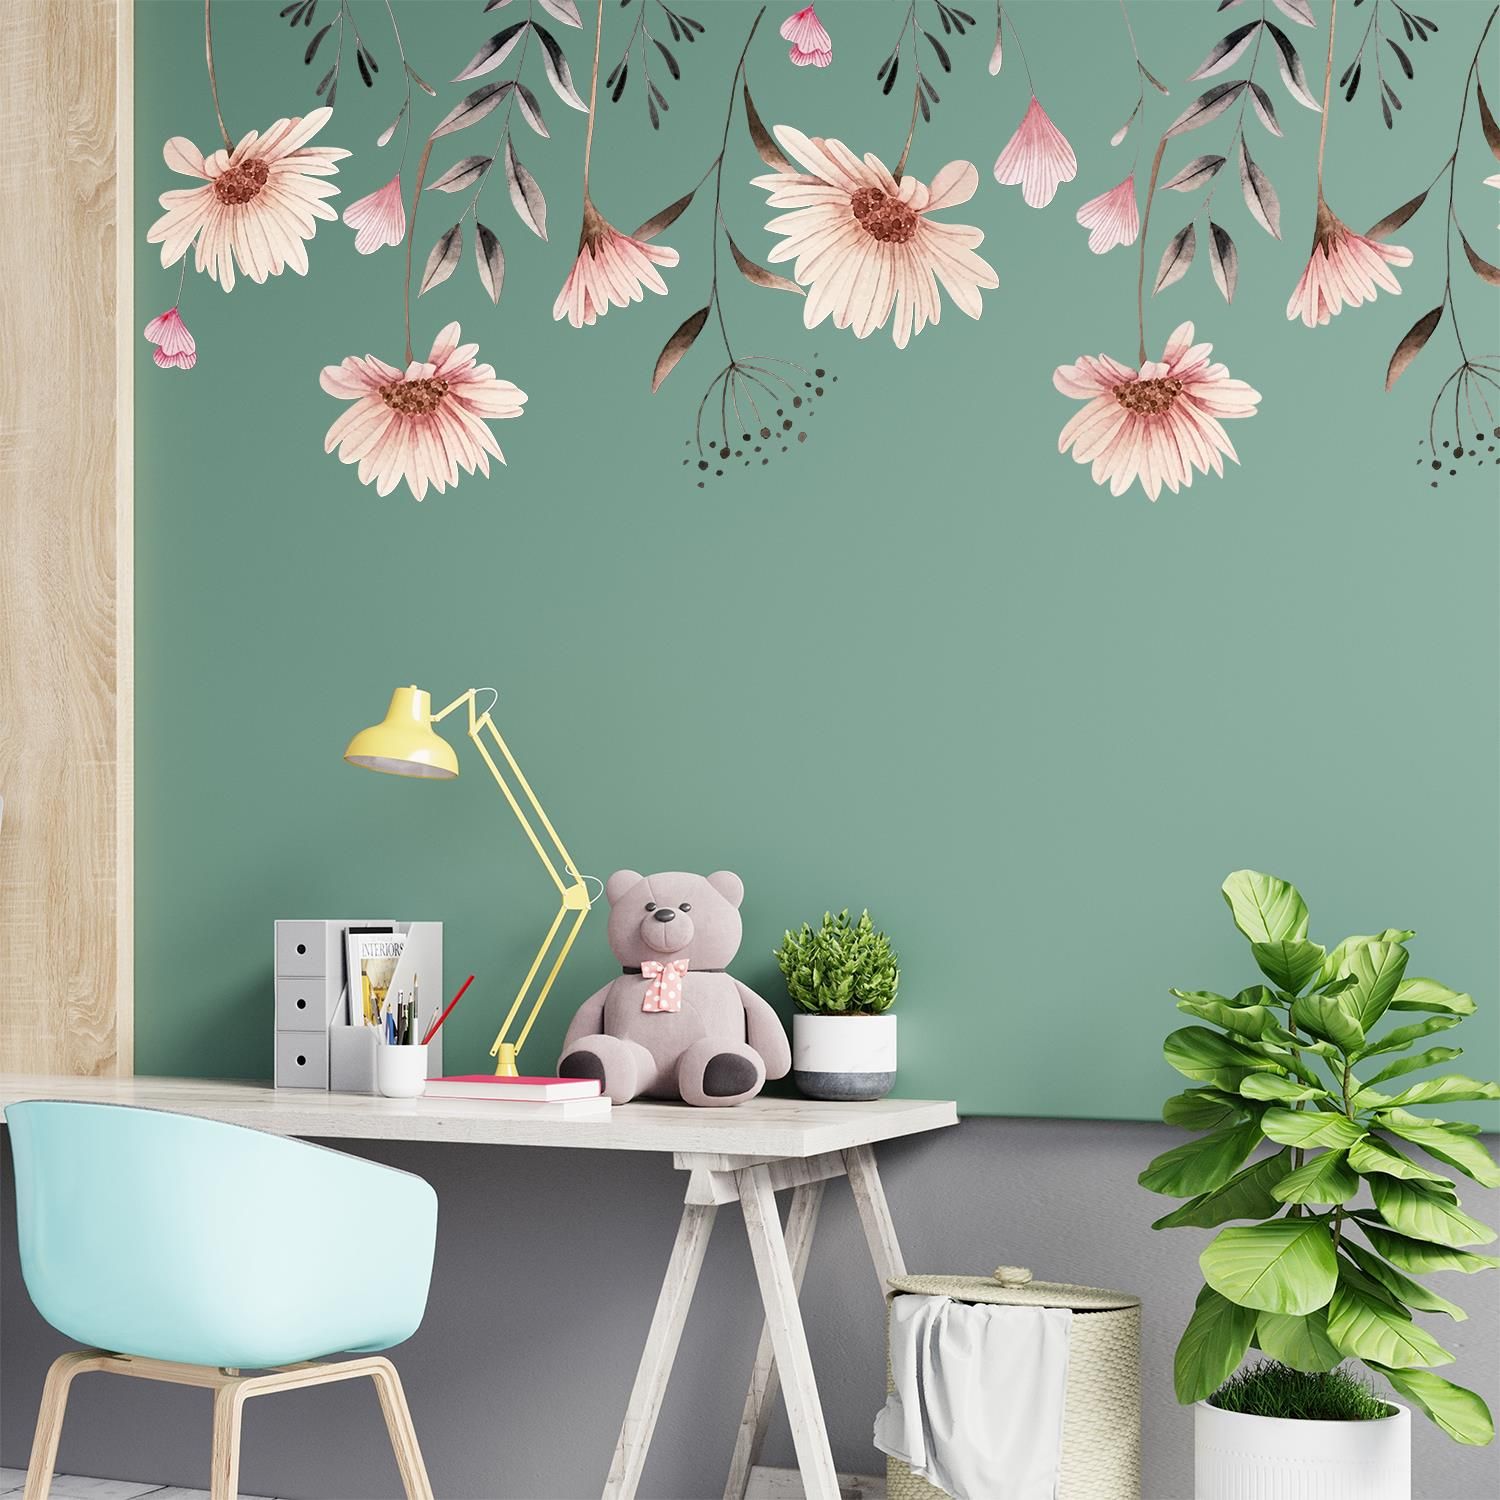 - Give to your rooms a gorgeous decoration with our Delicate Watercolour Flowers stickers set! 
- This product is easy to apply and easily removable using hair dryer. 
- If applied on wallpaper the sticker will NOT be REMOVABLE. Can be applied on laminated surfaces. 
- Please note that every effort is made to the illustration of our items accurately, however the colour may differ slightly when the product is applied on the mirror (due to the sunlight) and wall colour surfaces but might cause damage when removed. 
- The package contains 1 sheet of 60 x 90 cm containing 16 stickers.